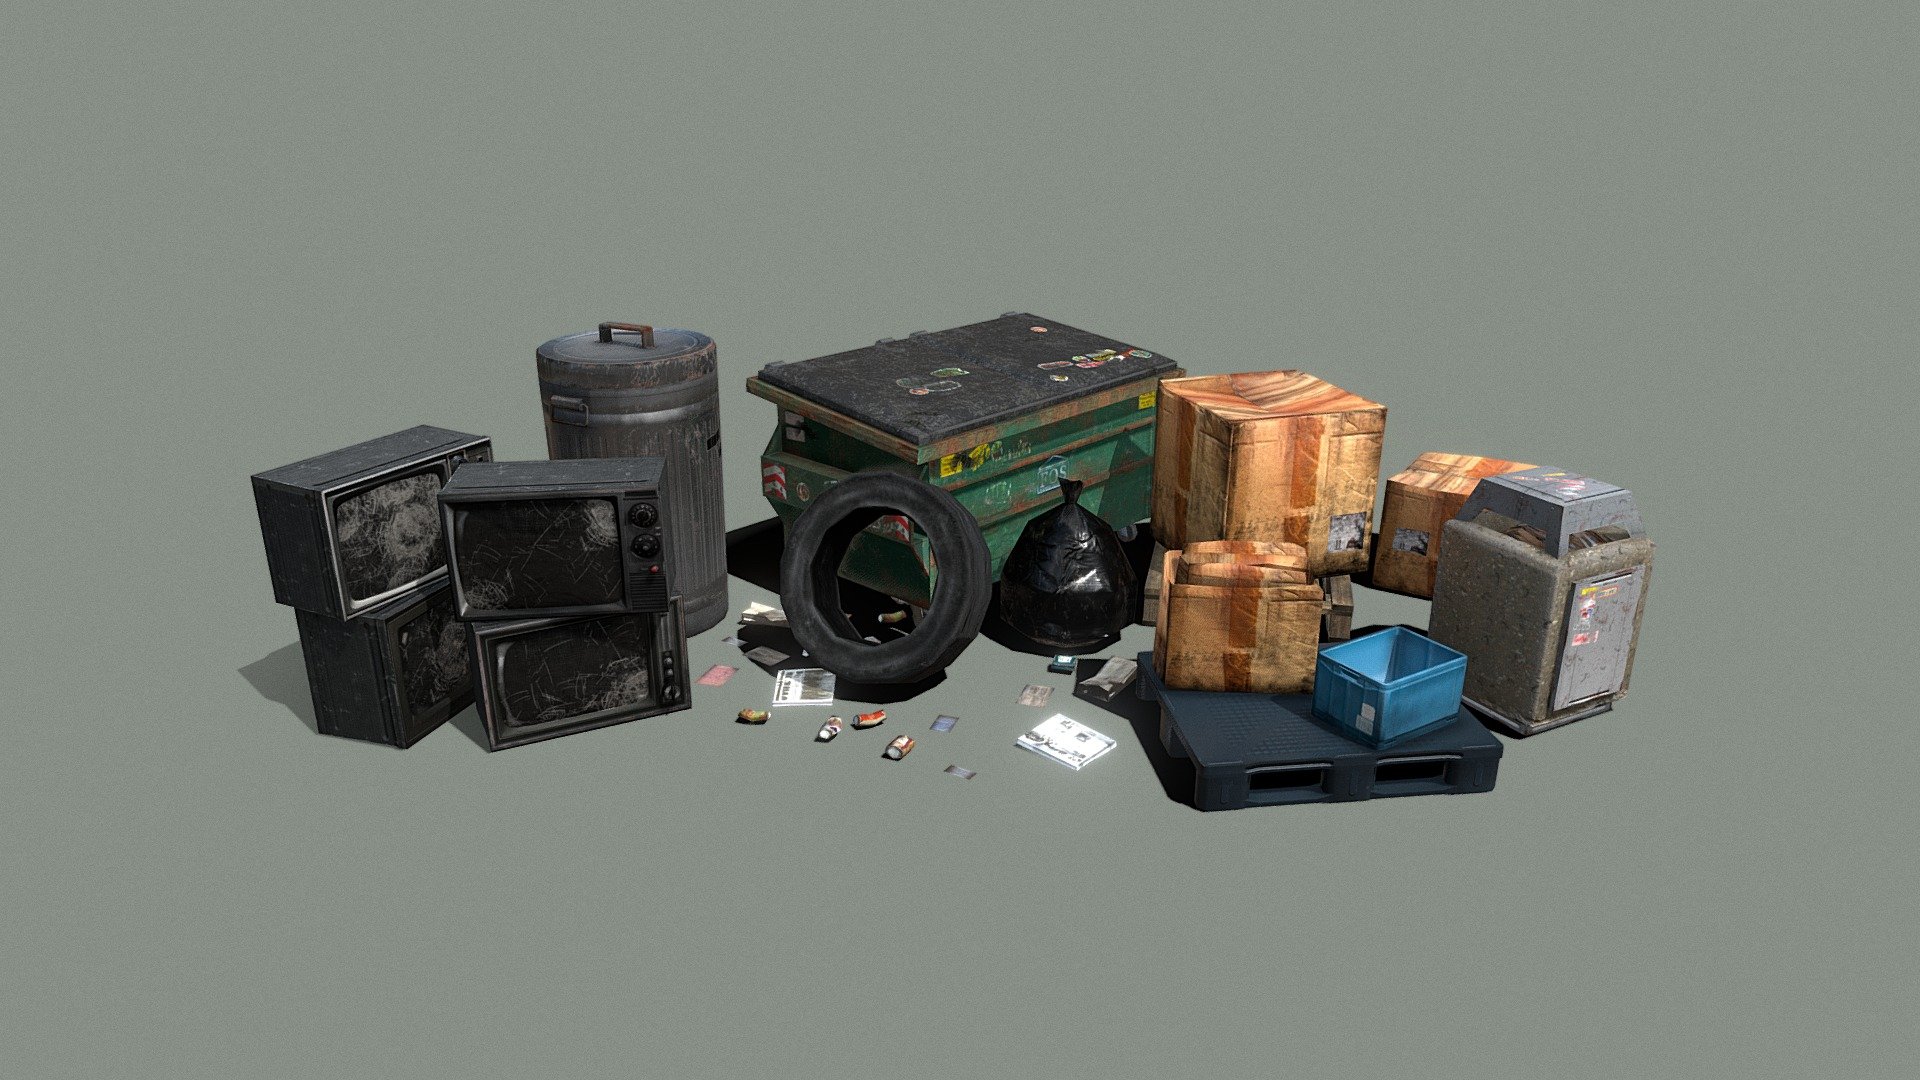 A set of themed low poly props to use in your projects. Use and modify them as you see fit and have a nice day 3d model